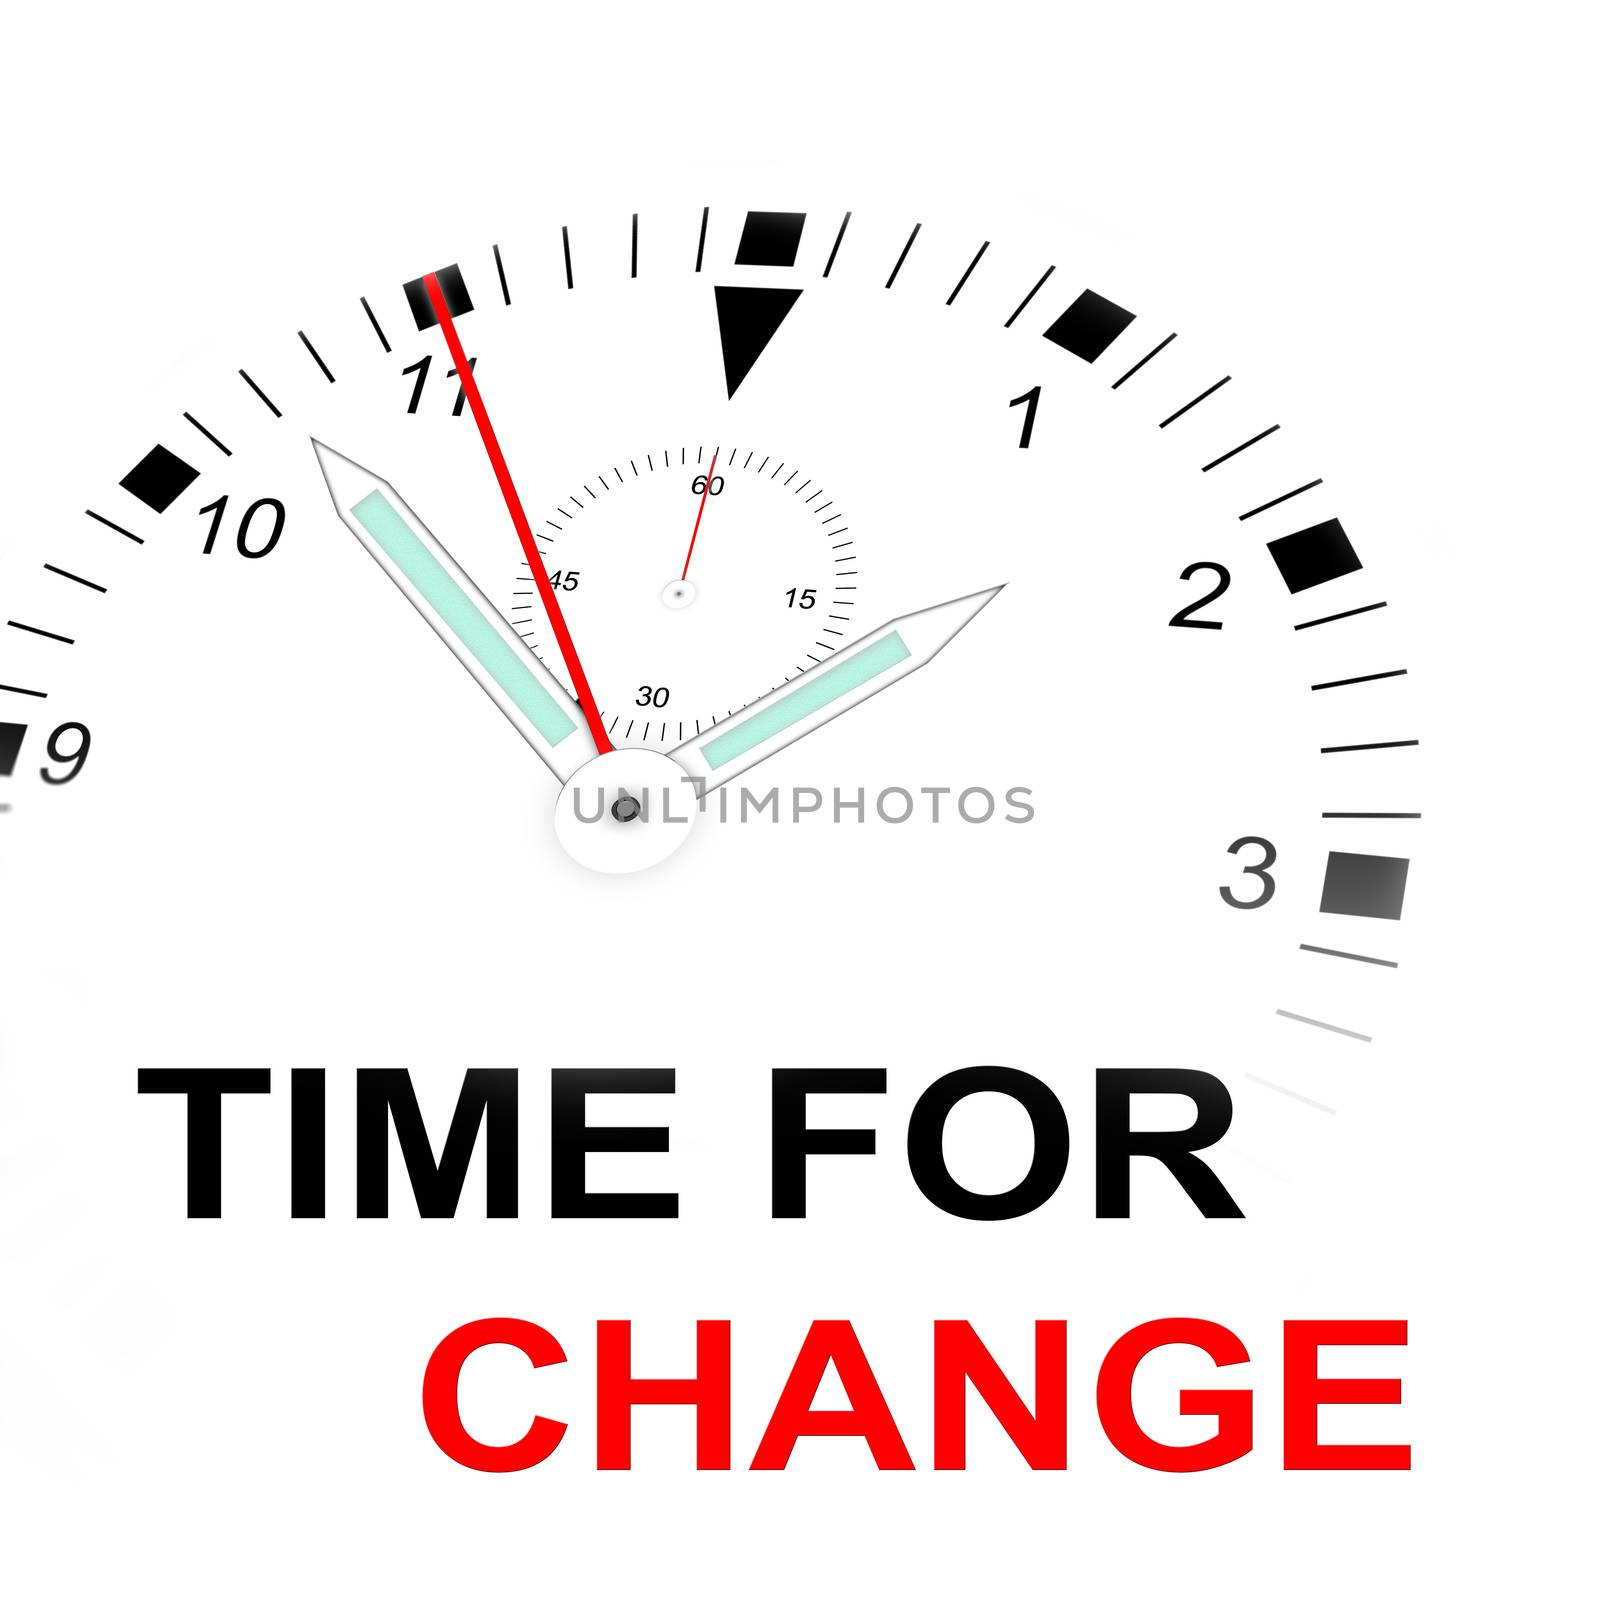 Illustration of a watch with text "TIME FOR CHANGE"